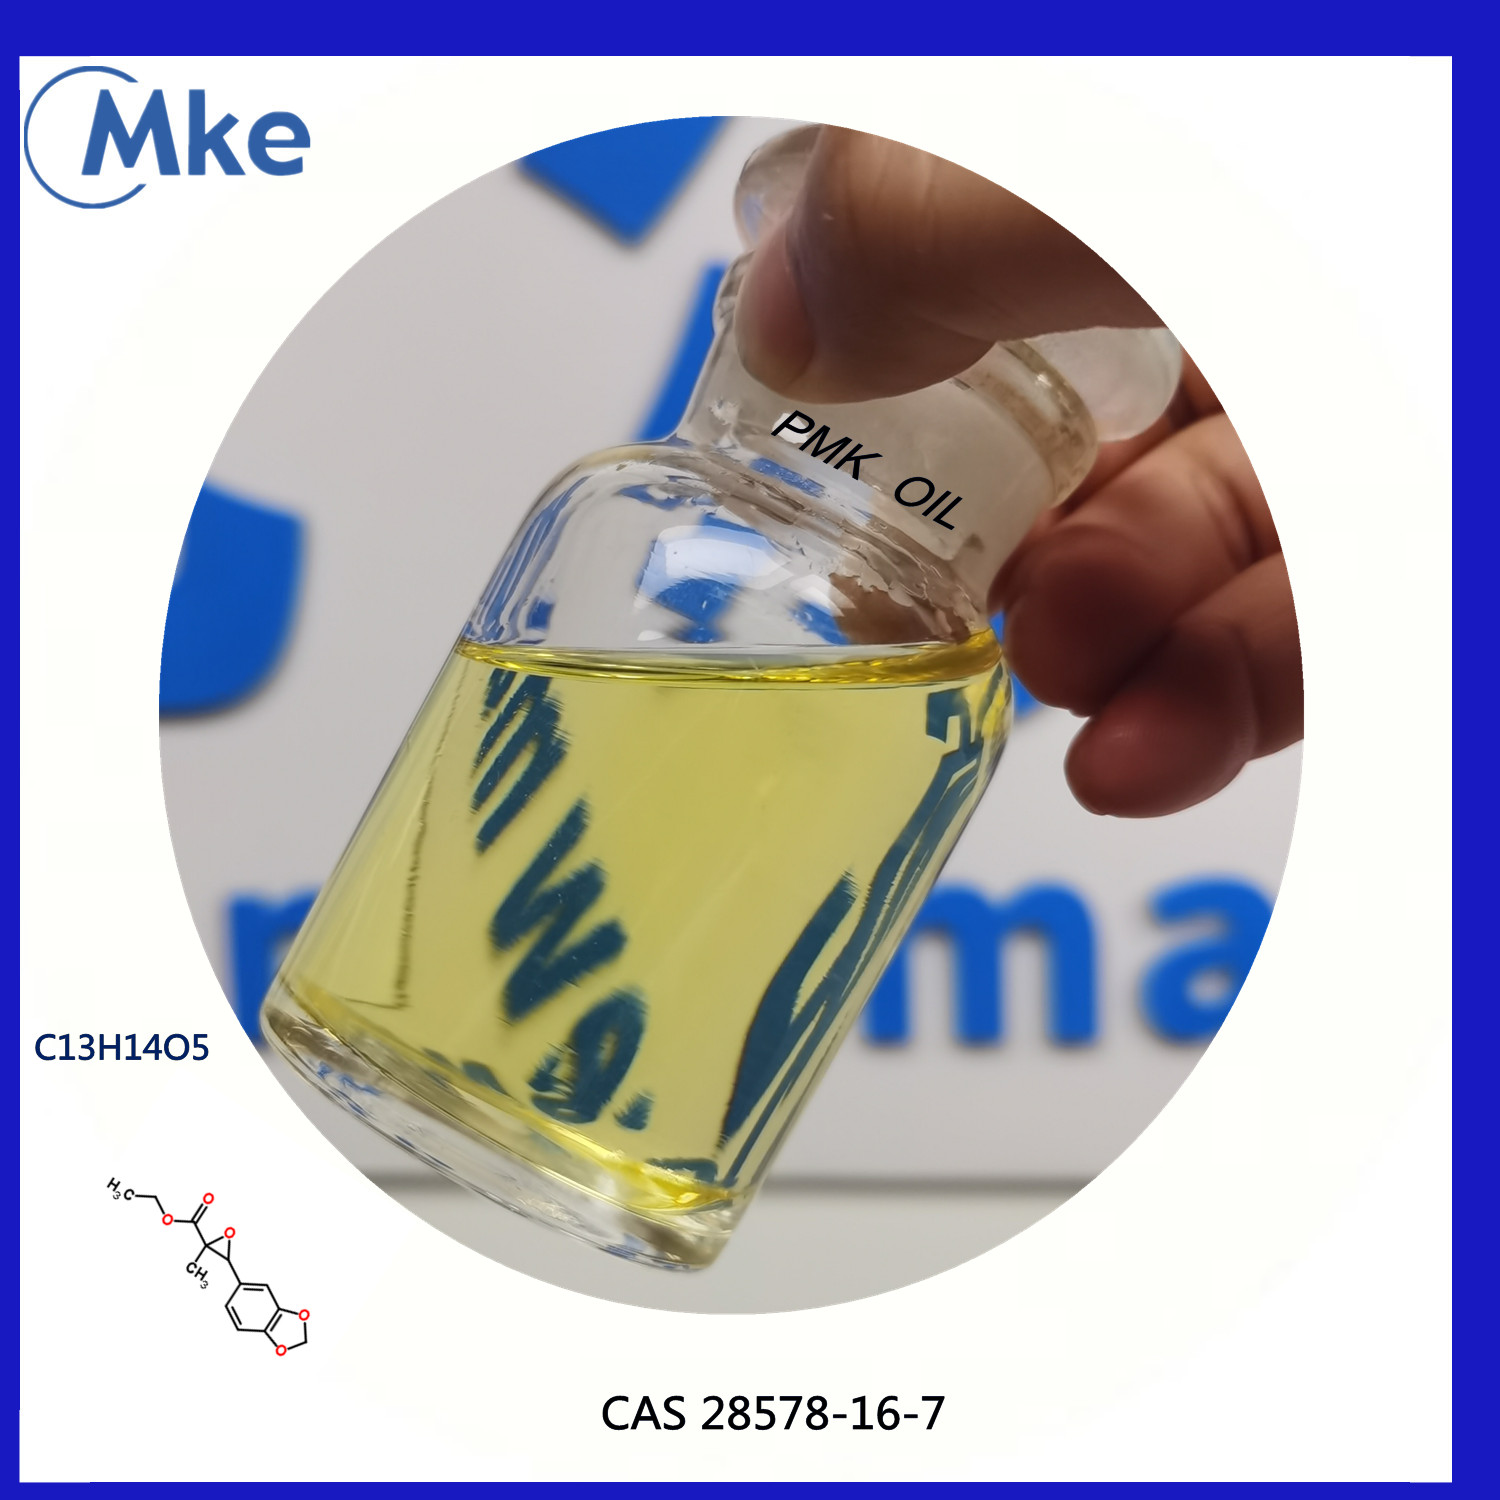 CAS 28578-16-7 PMK Ethyl Glycidate Oil with Safe Delivery